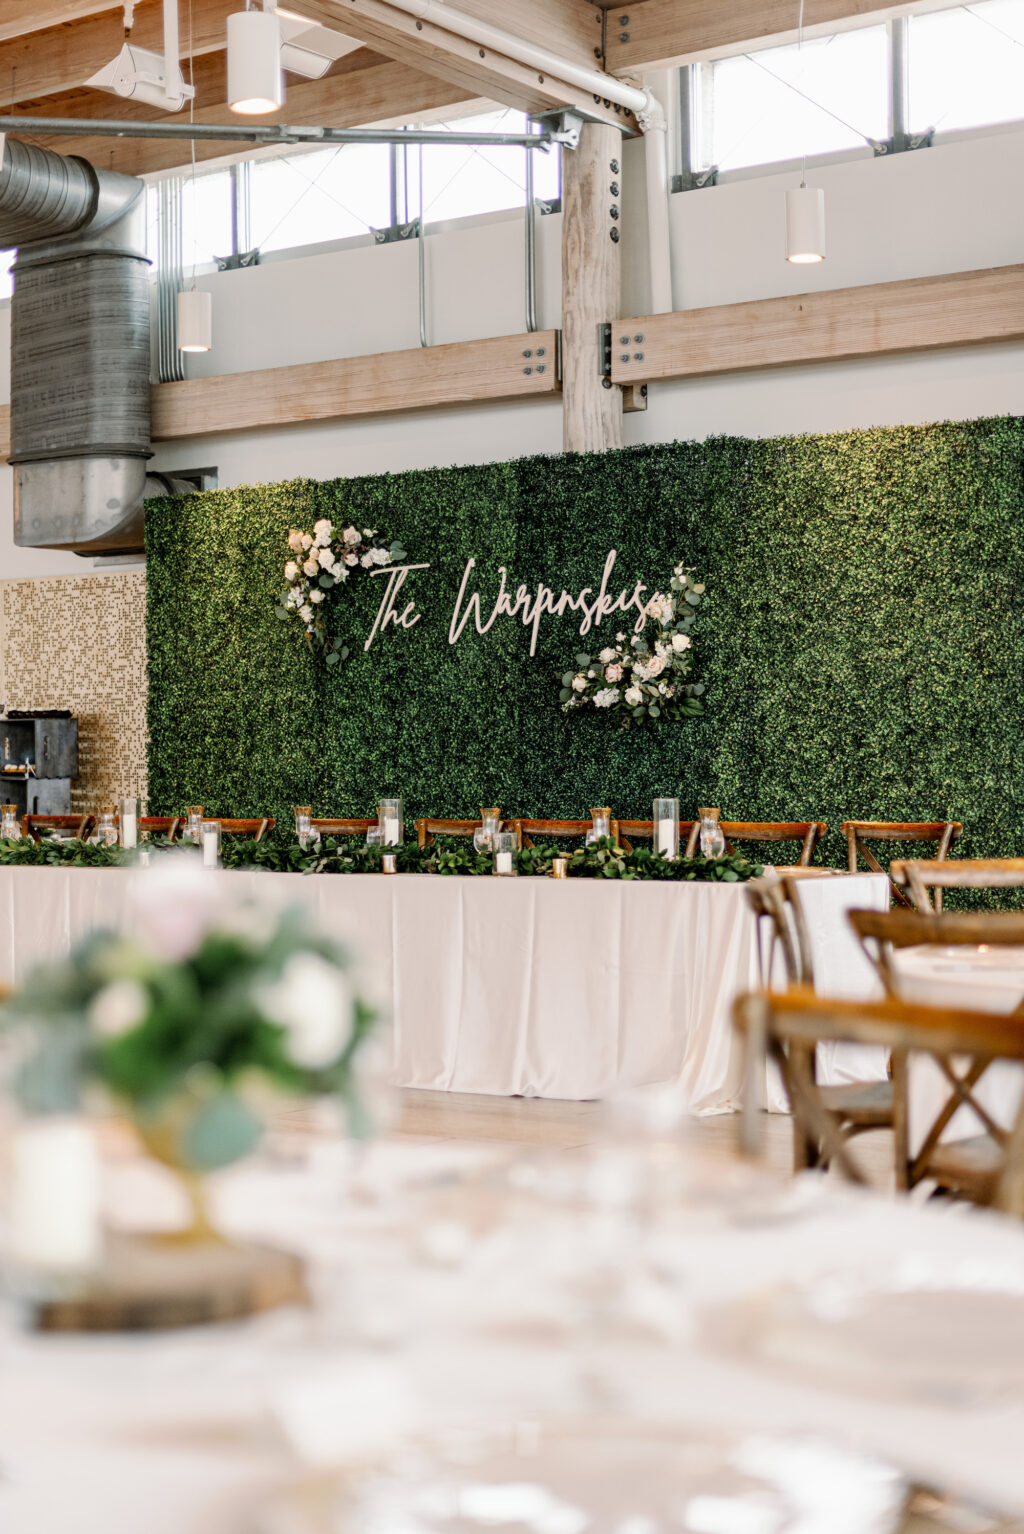 Grass Wall with Personalized Name Backdrop for Head Table | Rustic Wedding Reception Inspiration | Tampa Bay Kate Ryan Event Rentals